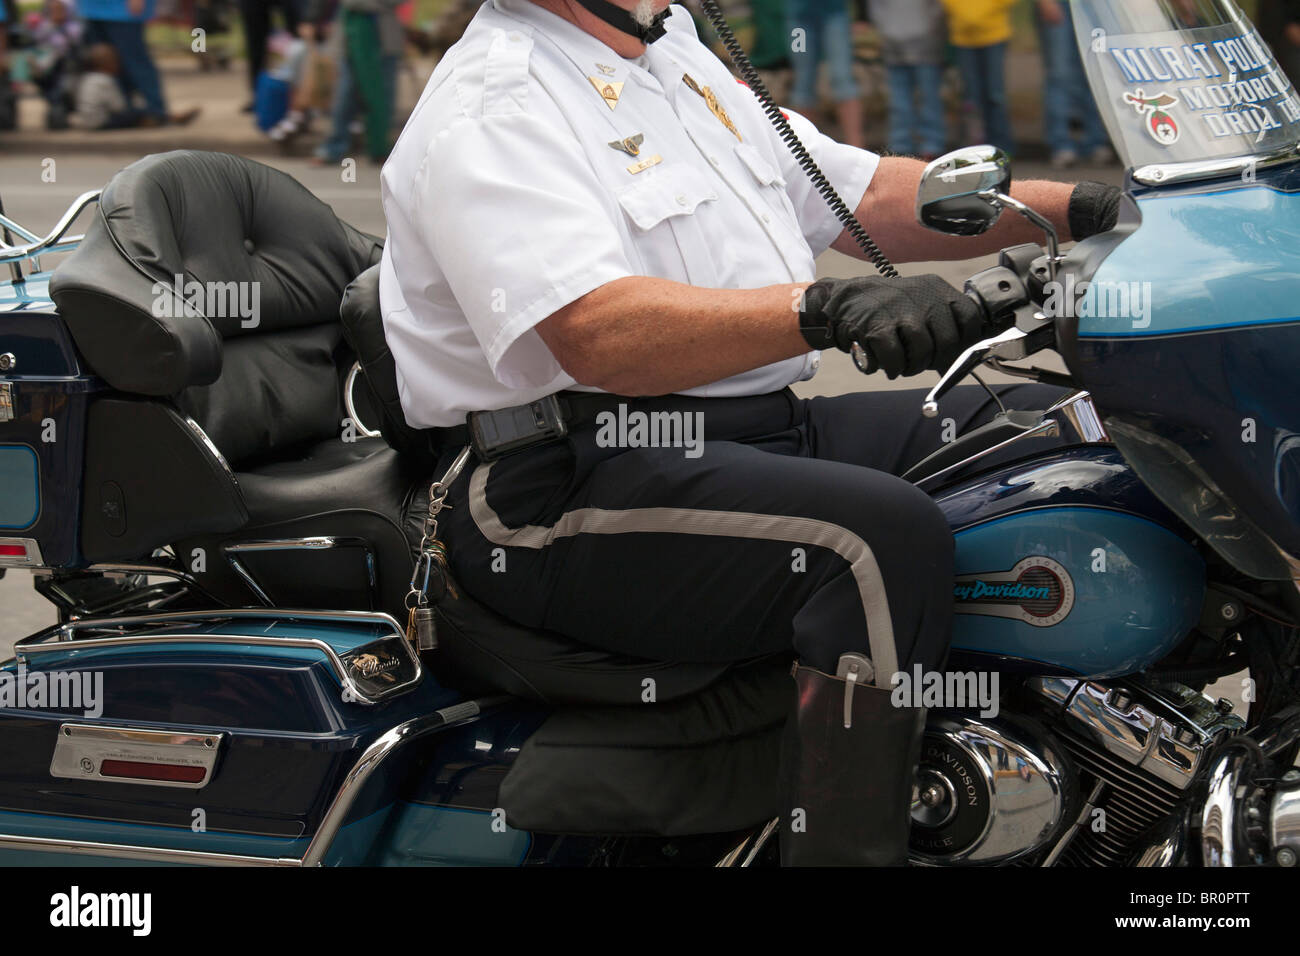 Indianapolis, Indiana - An obese man rides a motorcycle in the Labor Day parade. Stock Photo